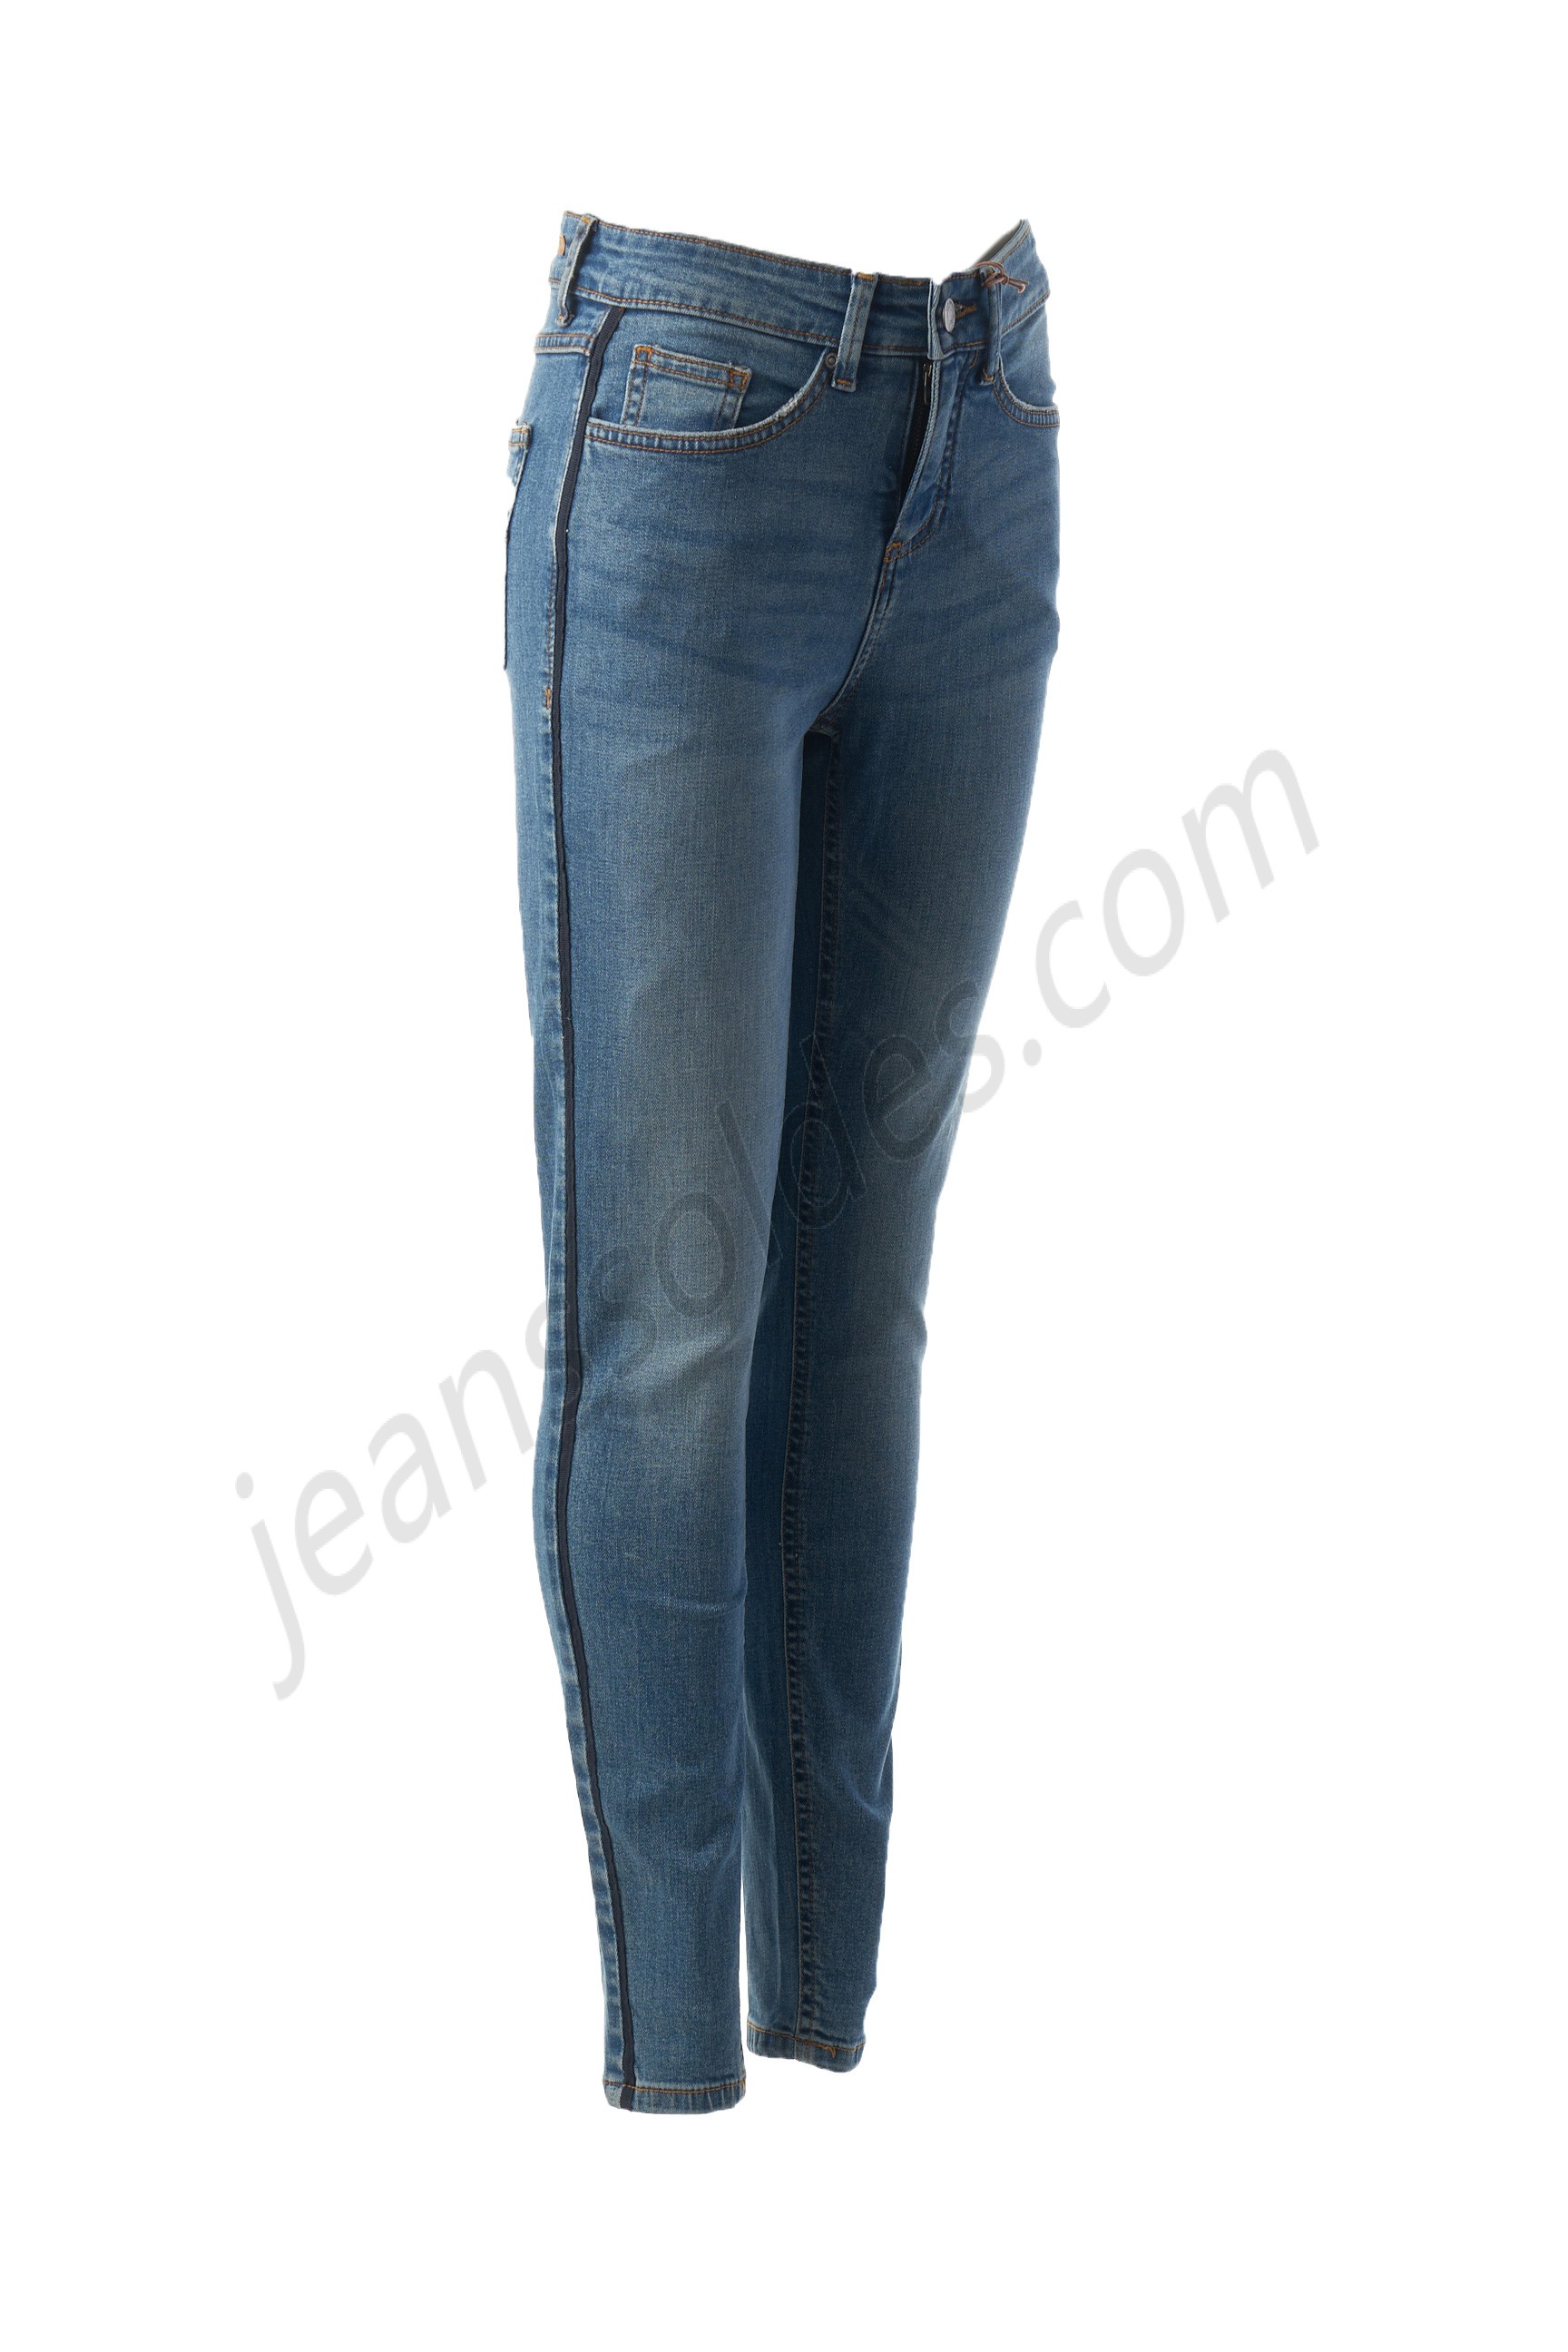 b.young-Jeans coupe slim prix d’amis - b.young-Jeans coupe slim prix d’amis